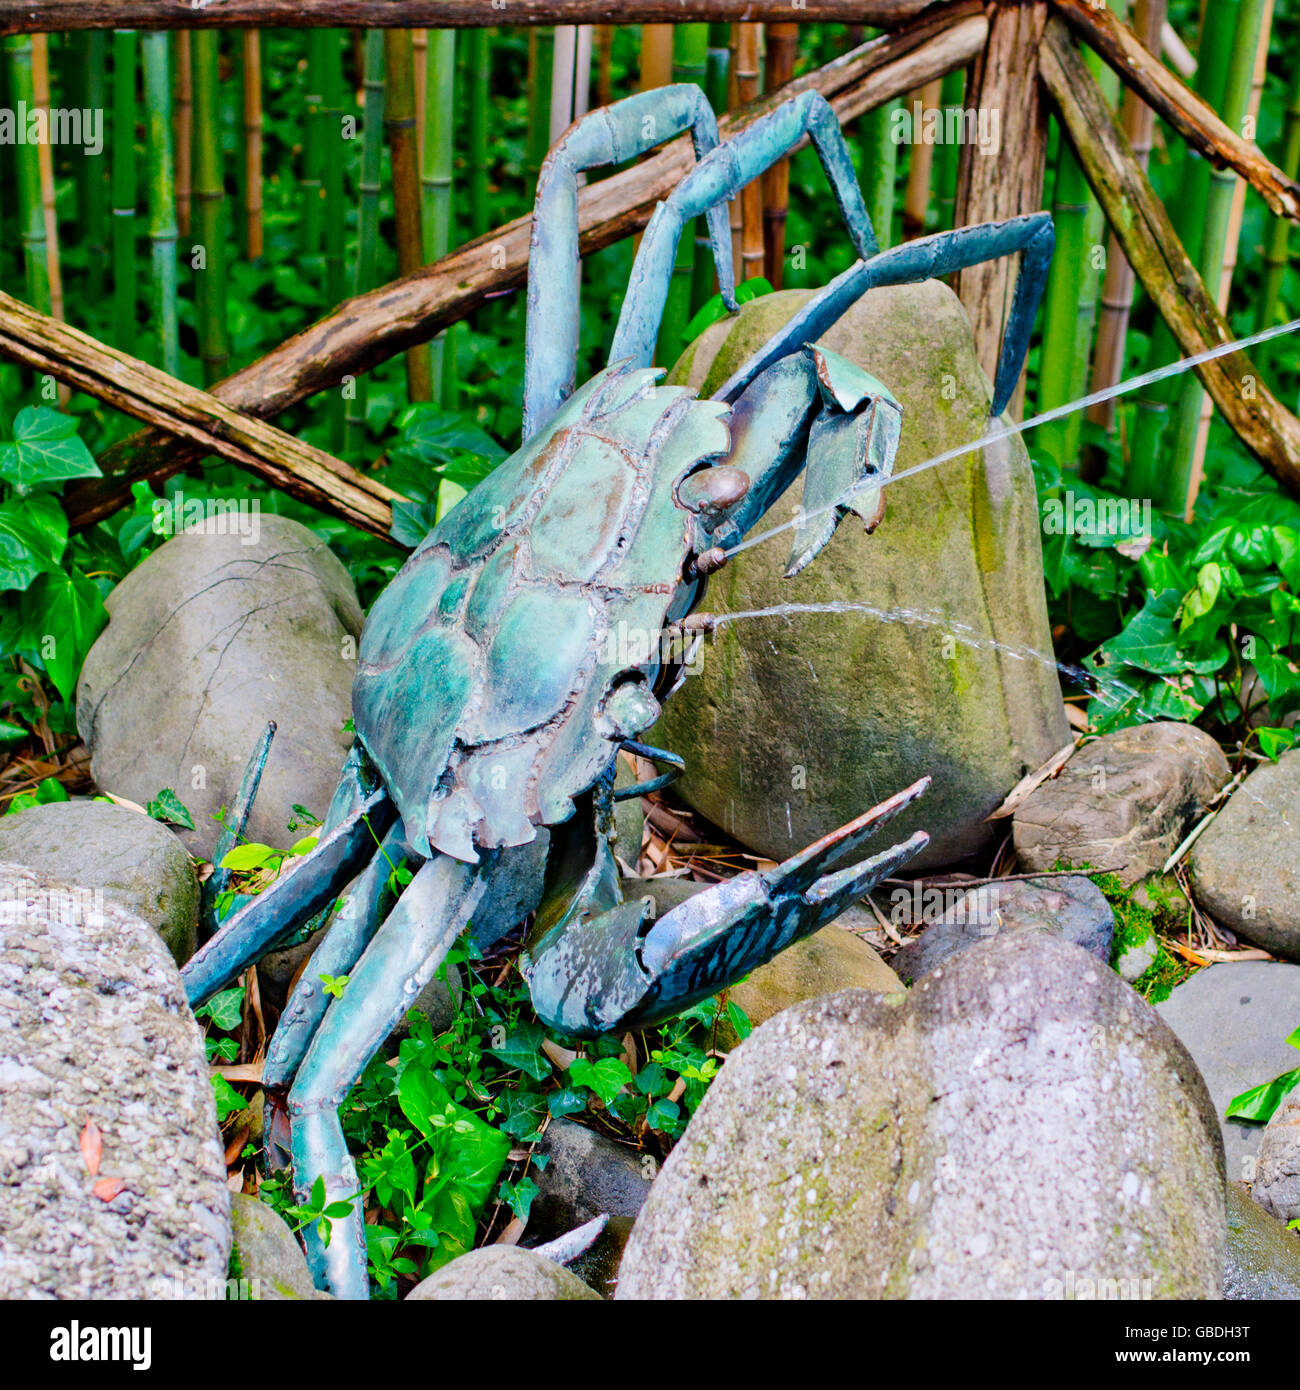 metal sculpture crabs partially oxidized sprays water to passers-by a forest of bamboo canes Stock Photo